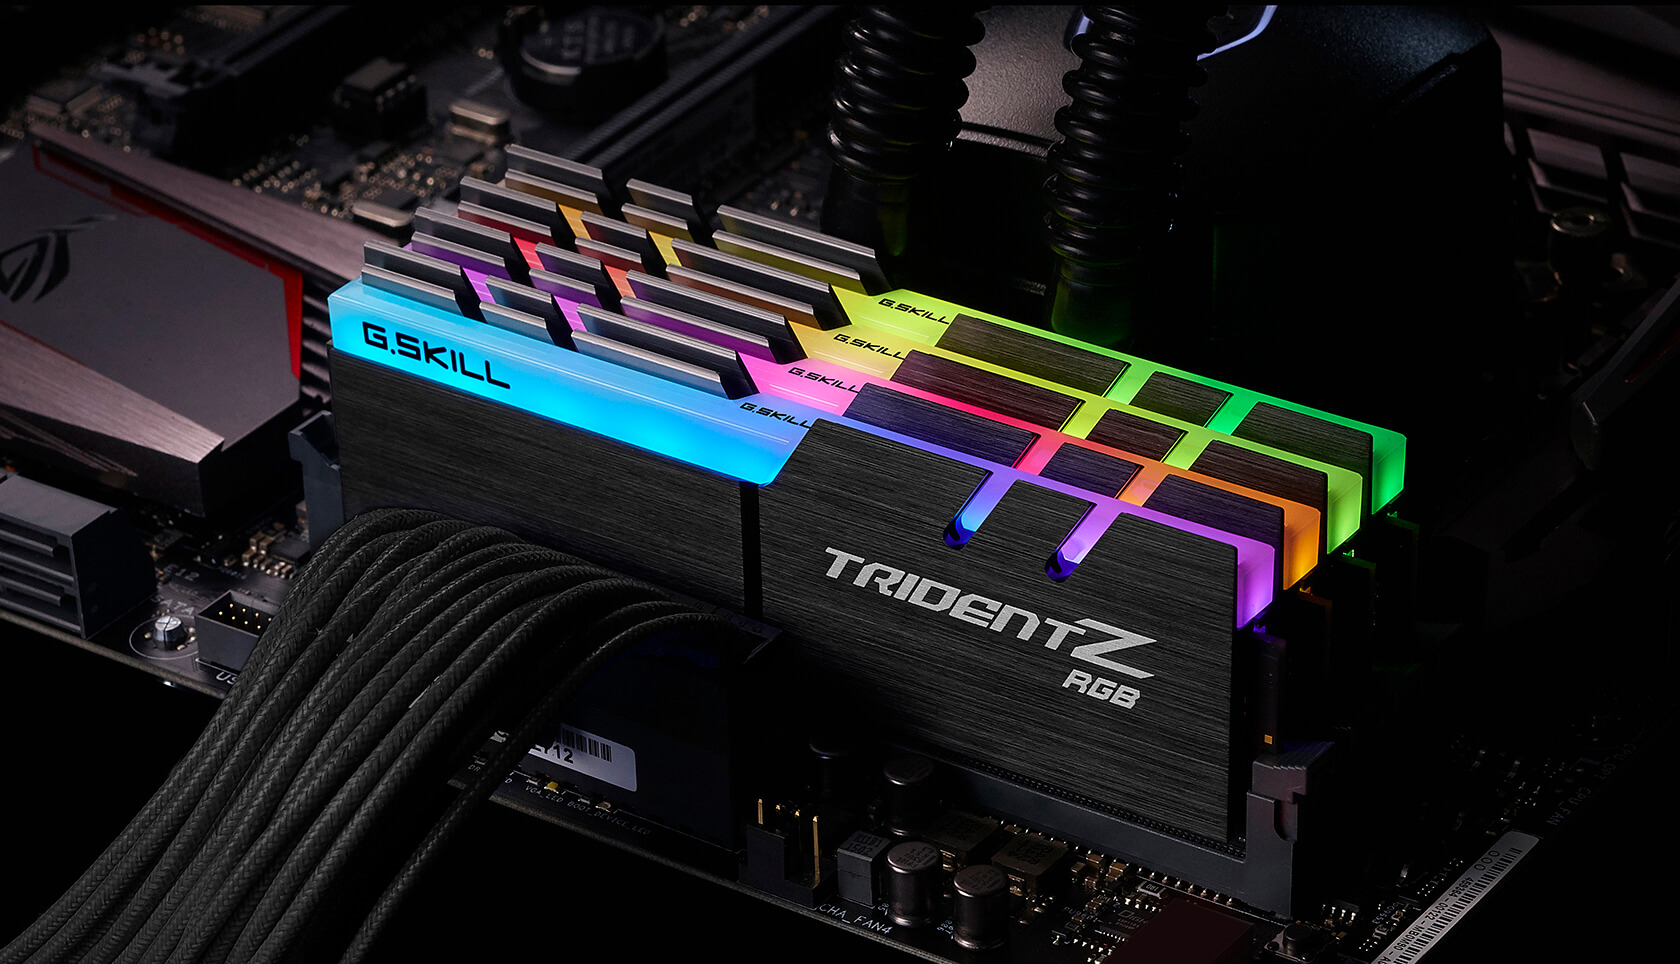 G.Skill breaks the 5GHz barrier with RGB memory using only air cooling